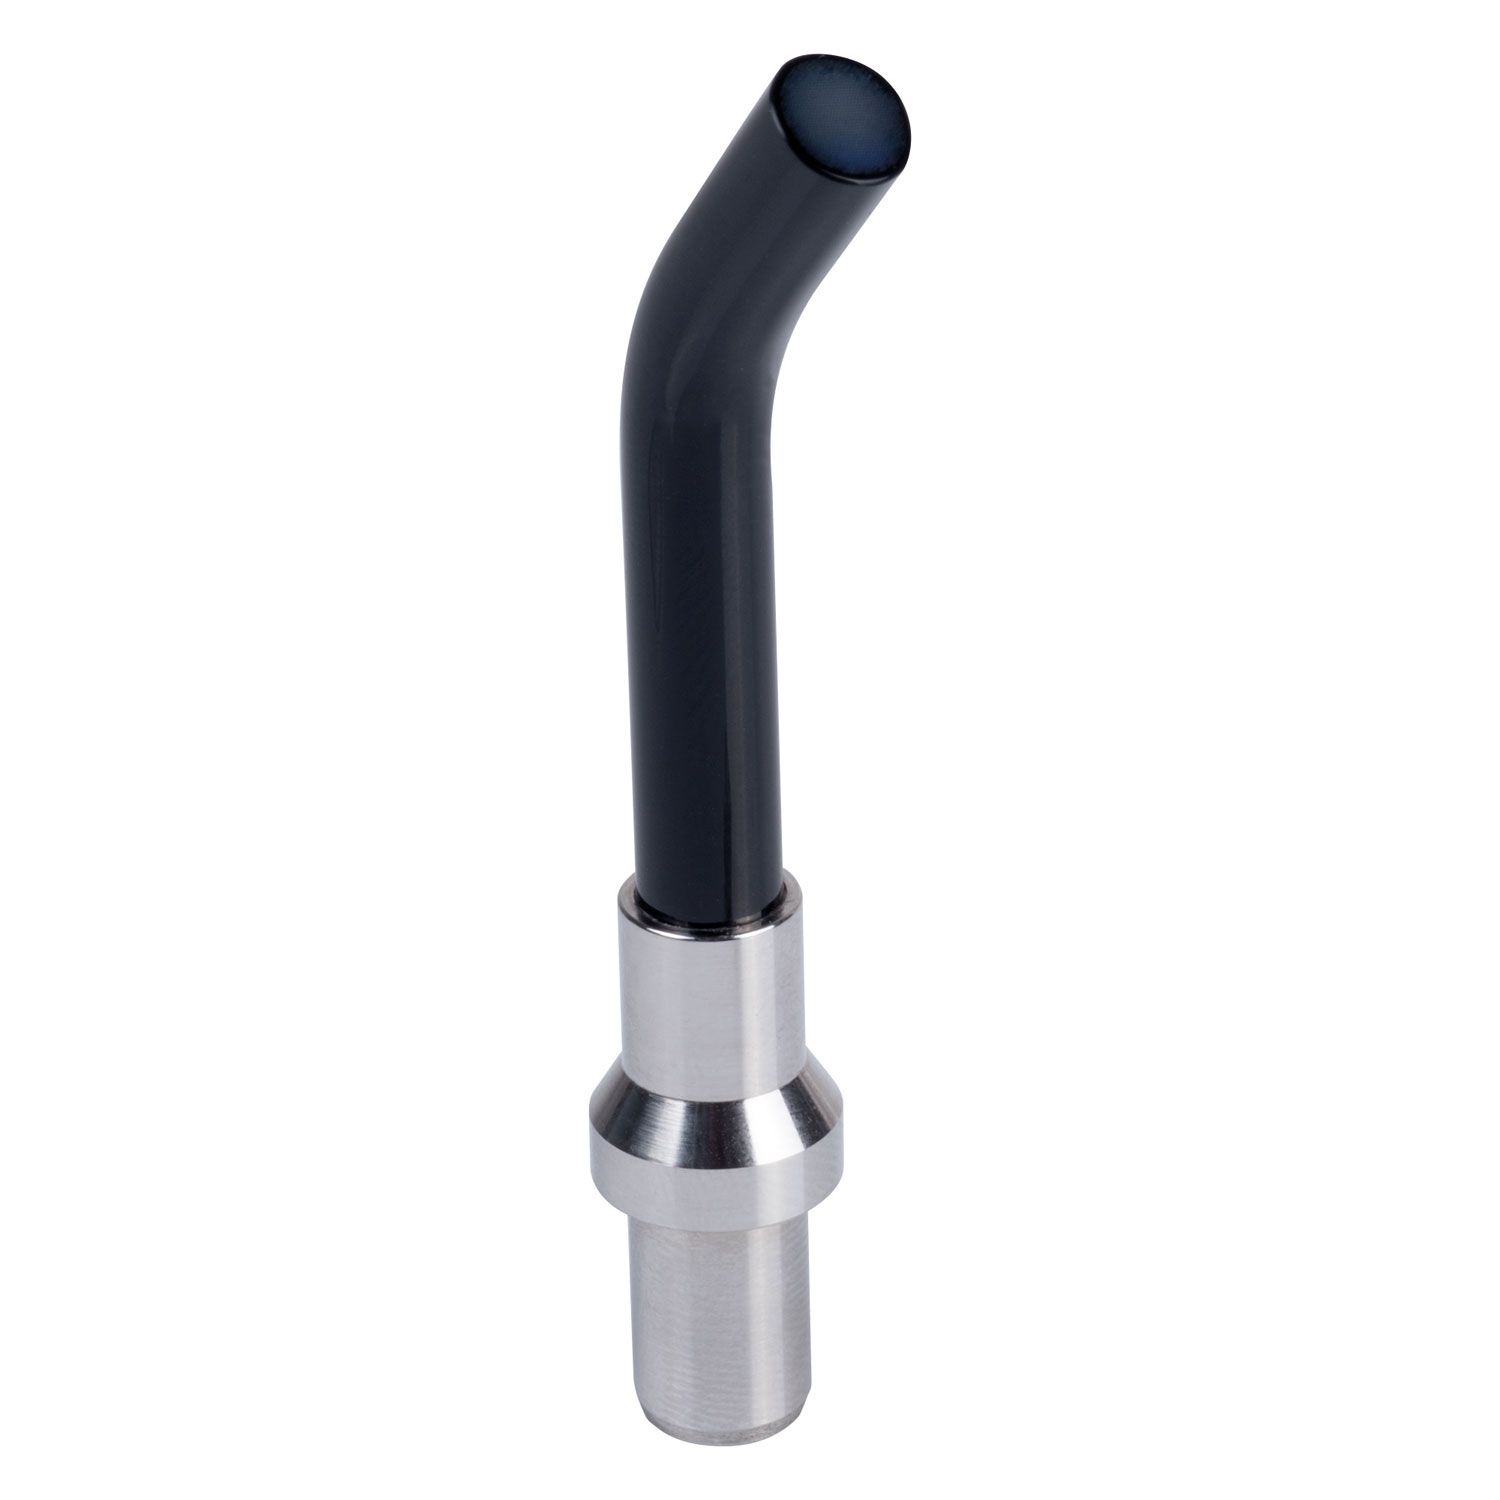 3TECH Curing Light Guide - 8mm